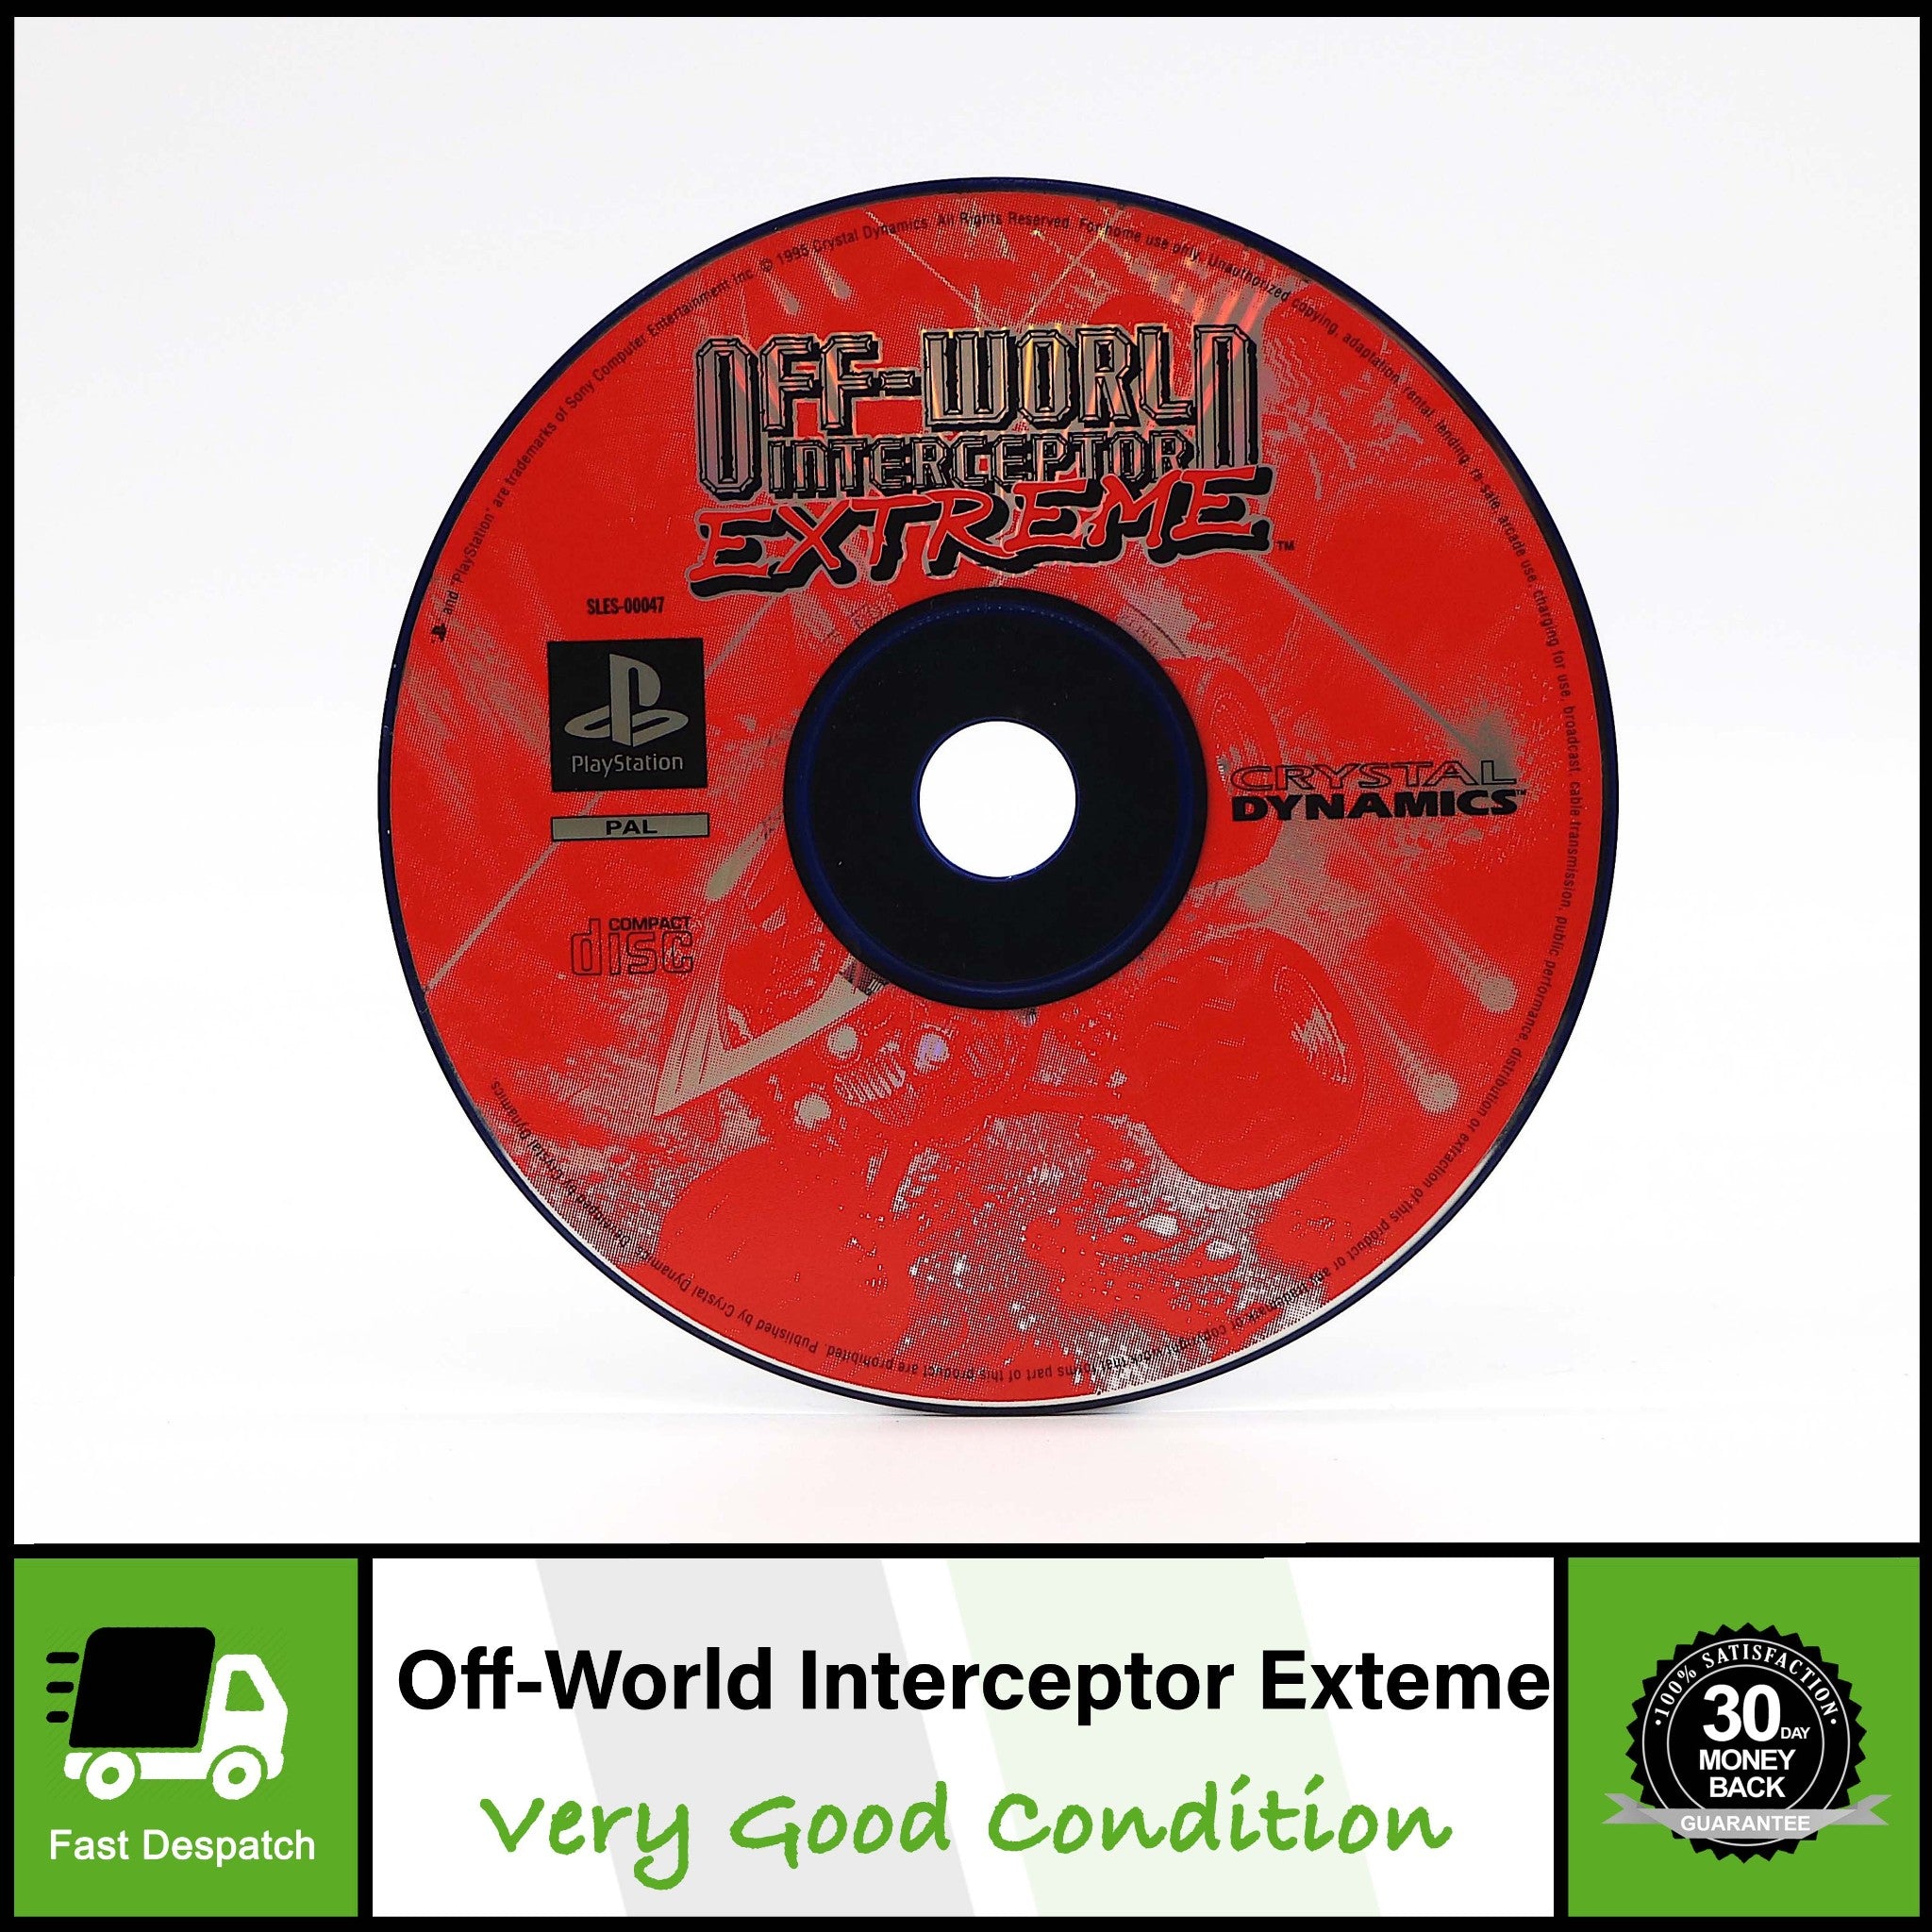 Off-World Interceptor Extreme | Sony Playstation 2 PS2 Game | Disc Only